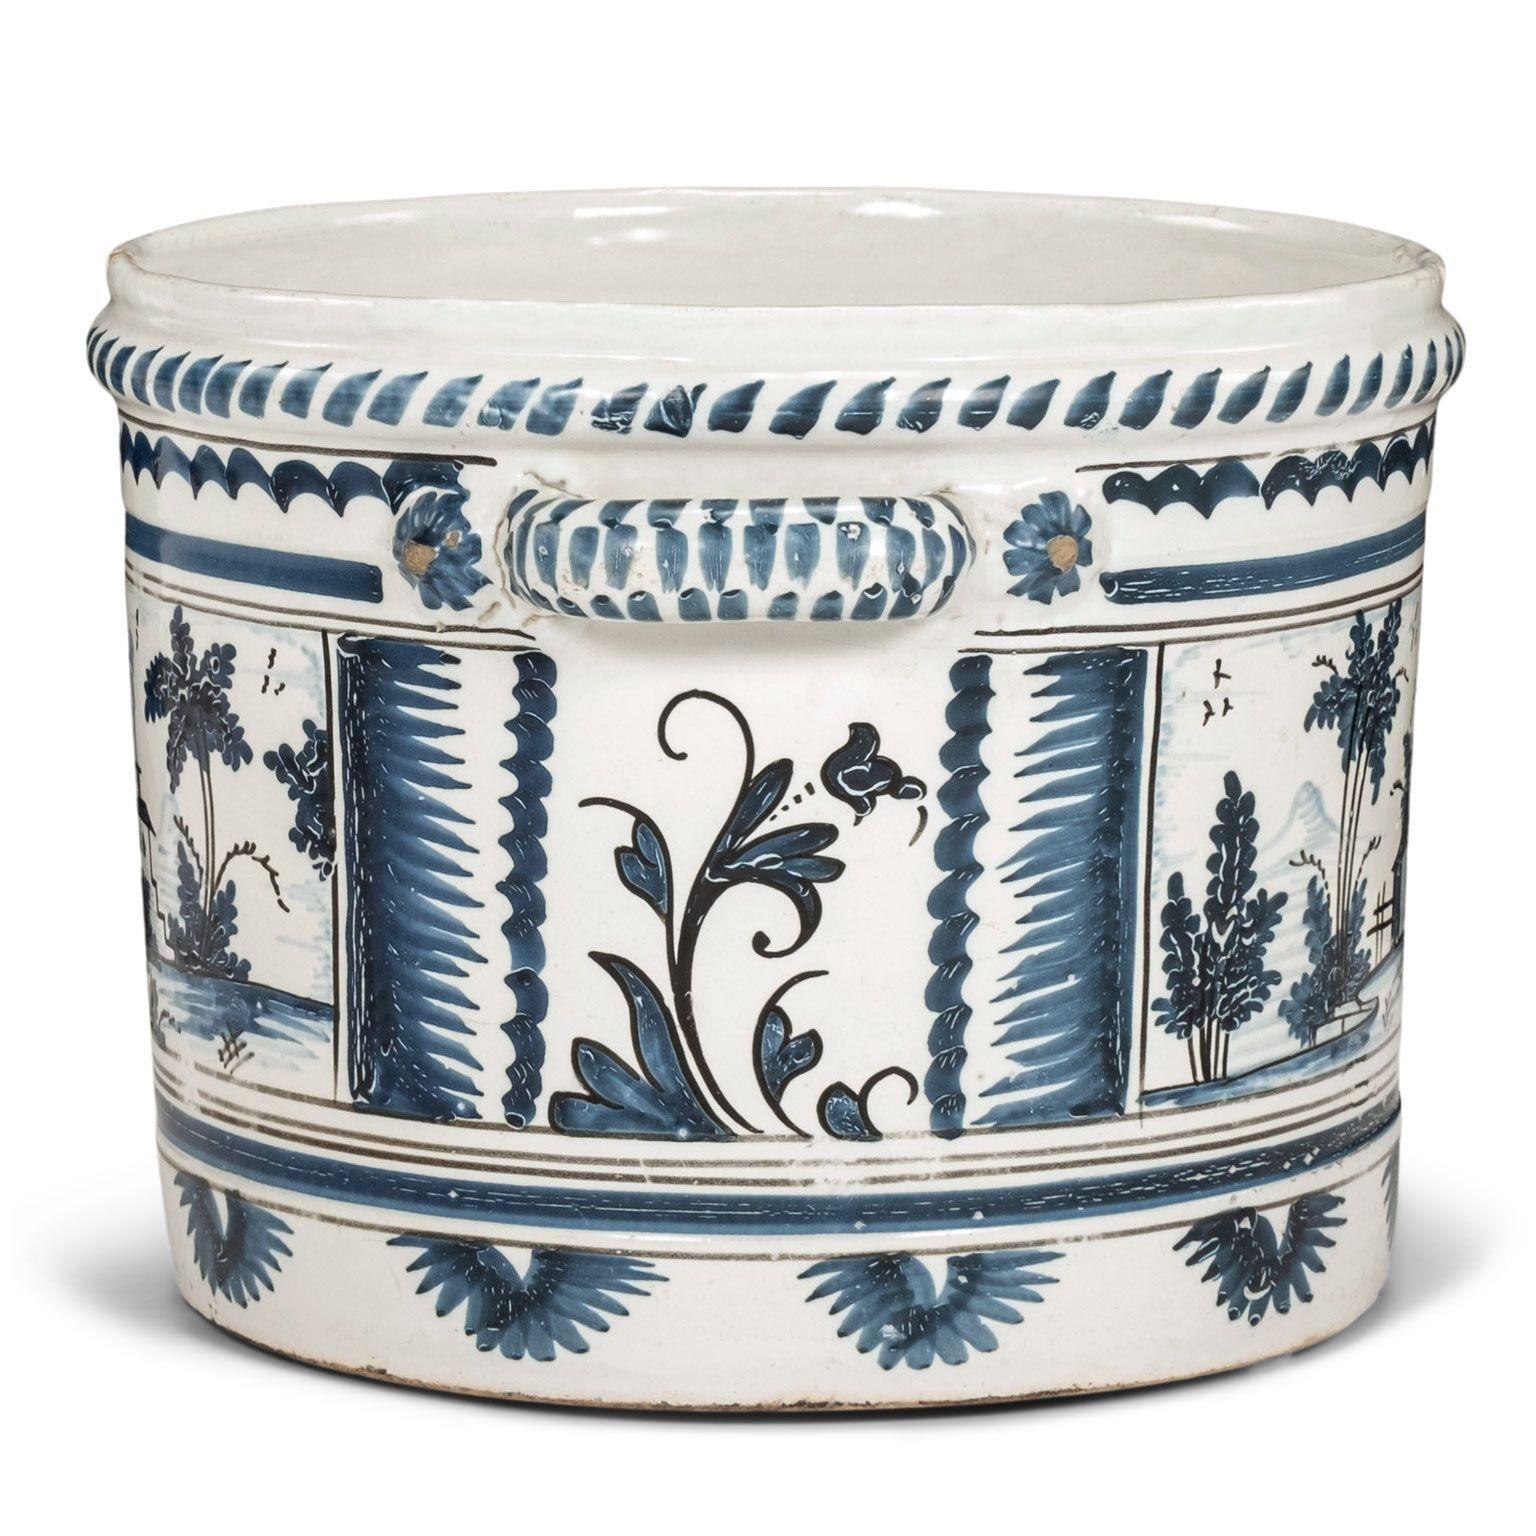 Nevers Faience 'Pot a Oranger' adorned with painted farmhouse scenes and scrolled decoration in shades of blue (camaieu bleu). This circa 1750-1780 tin-glazed planter comes from Nevers, France, an important site of faience production in the 18th